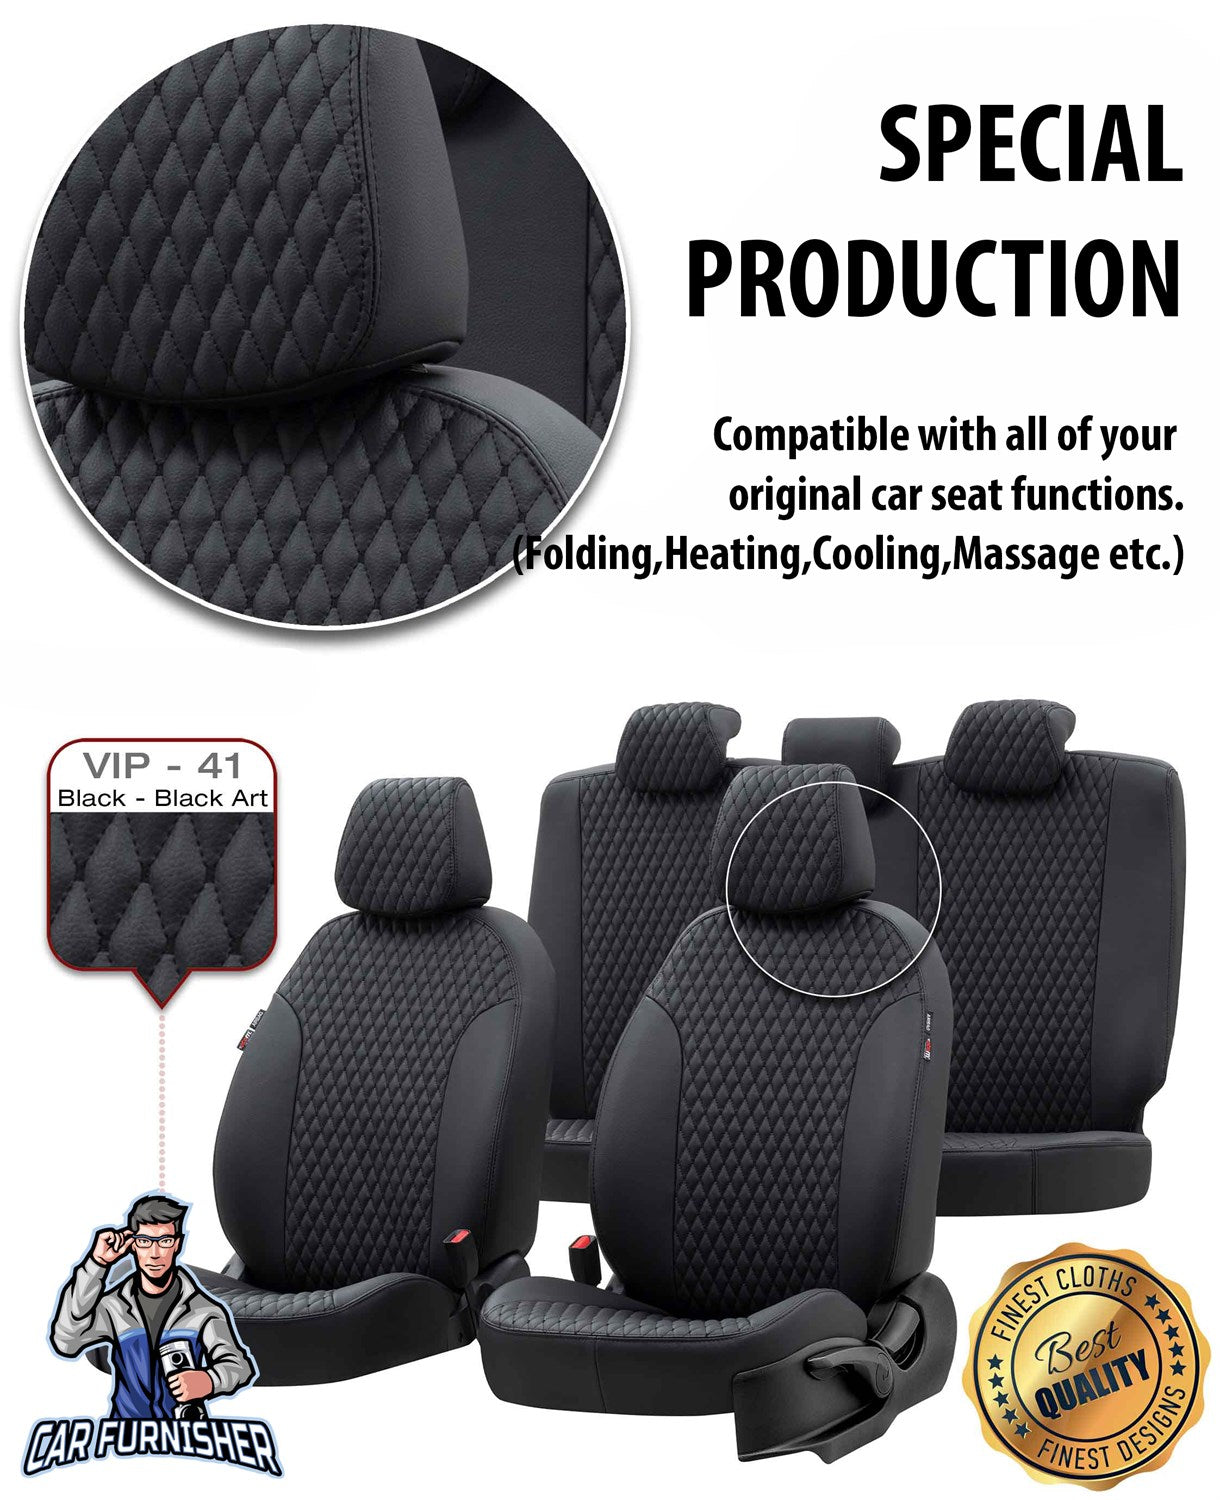 Mercedes C Class Seat Covers Amsterdam Leather Design Black Leather